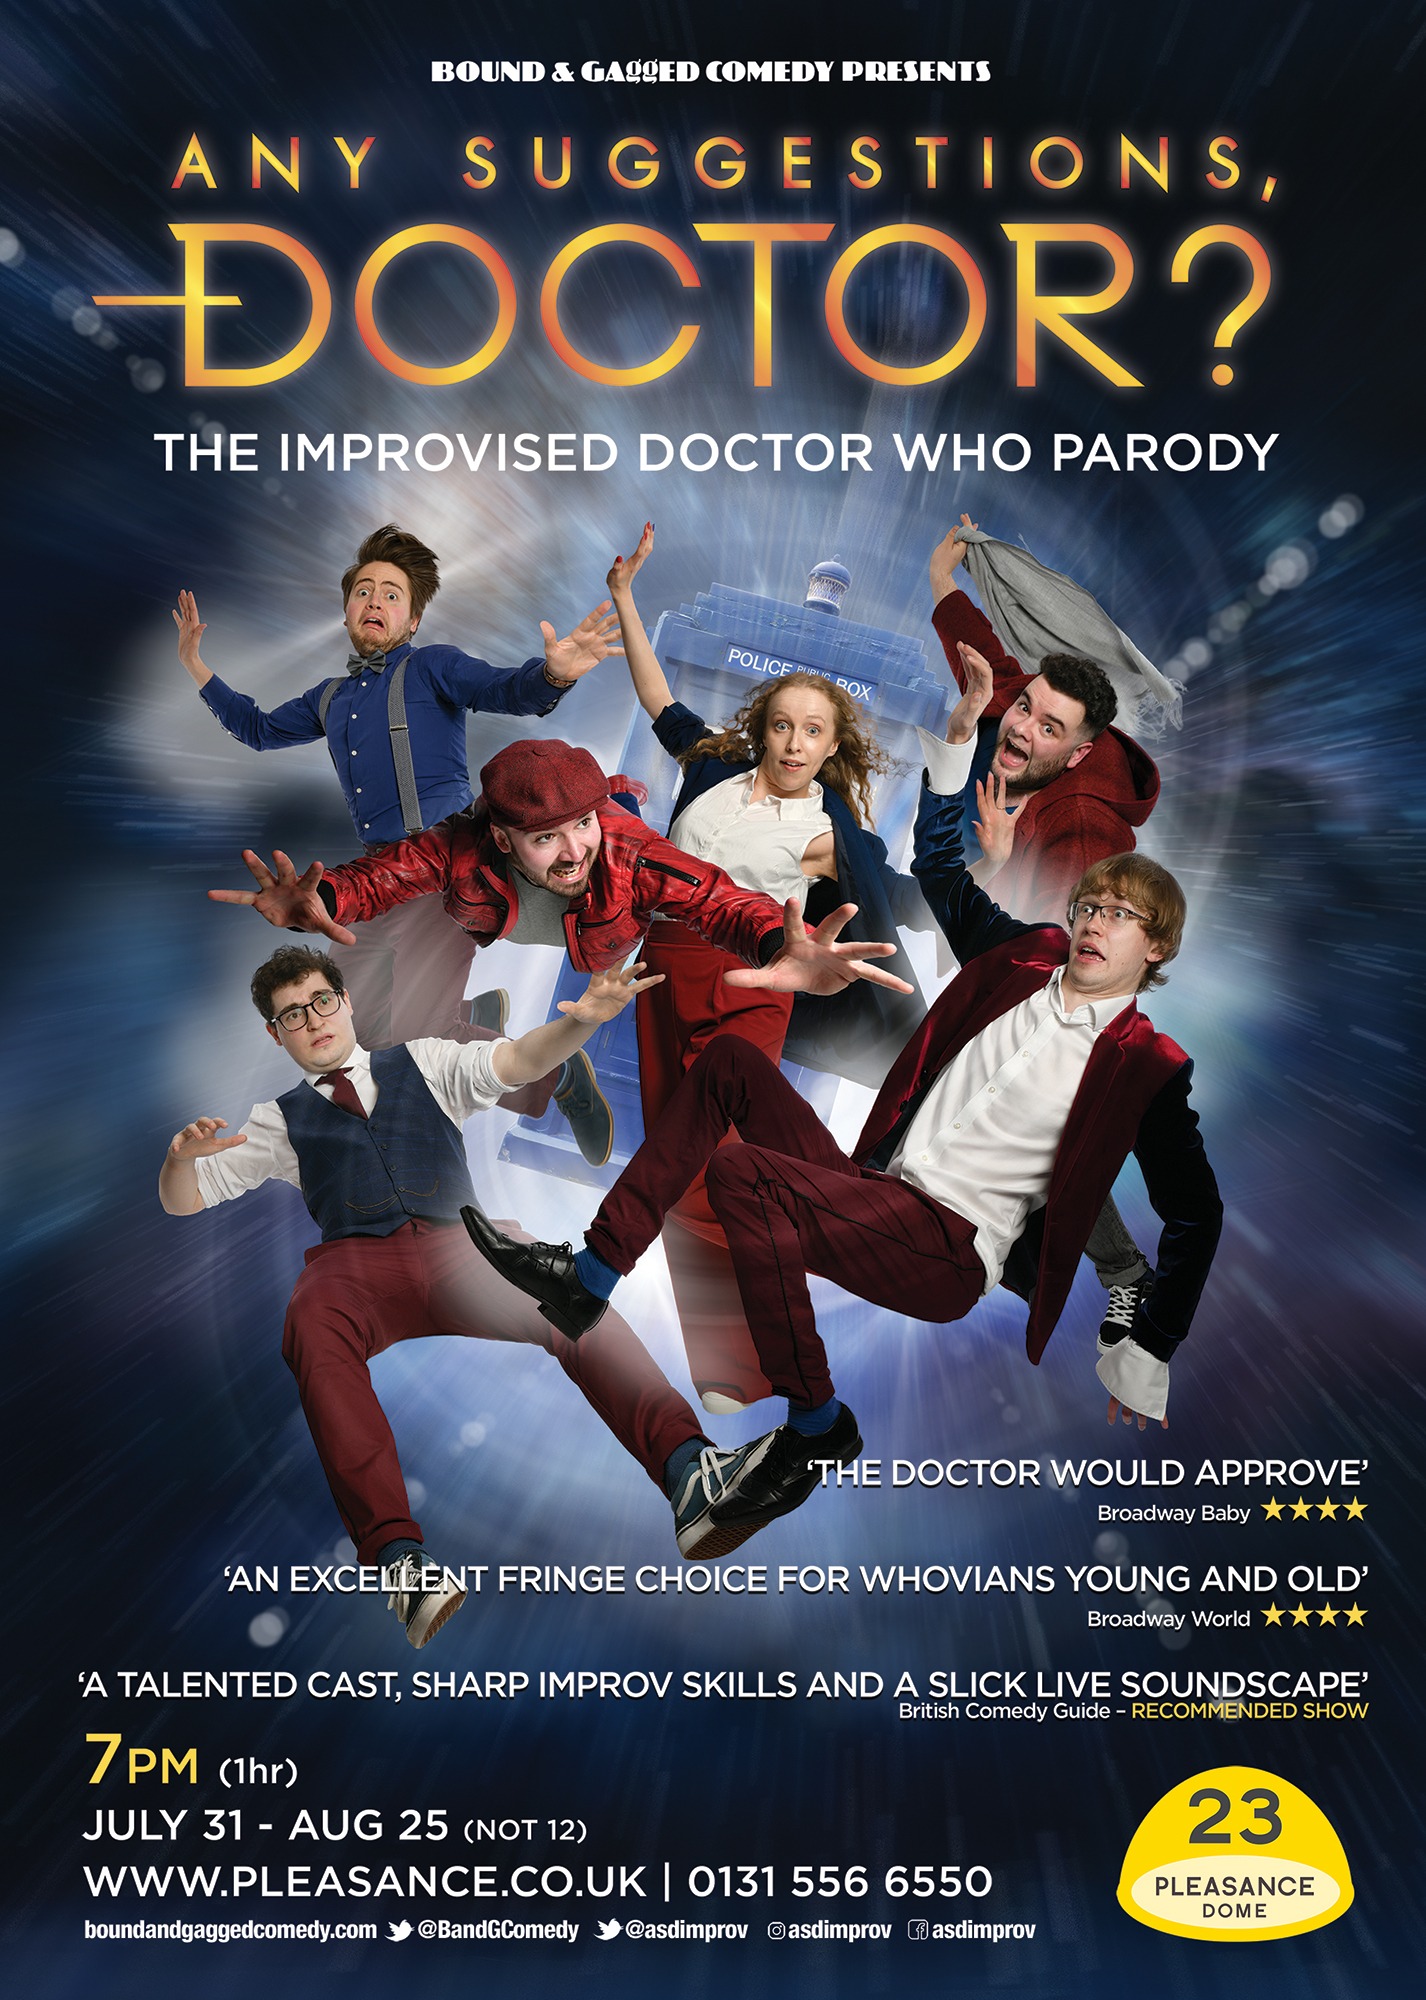 The poster for Any Suggestions, Doctor? The Improvised Doctor Who Parody